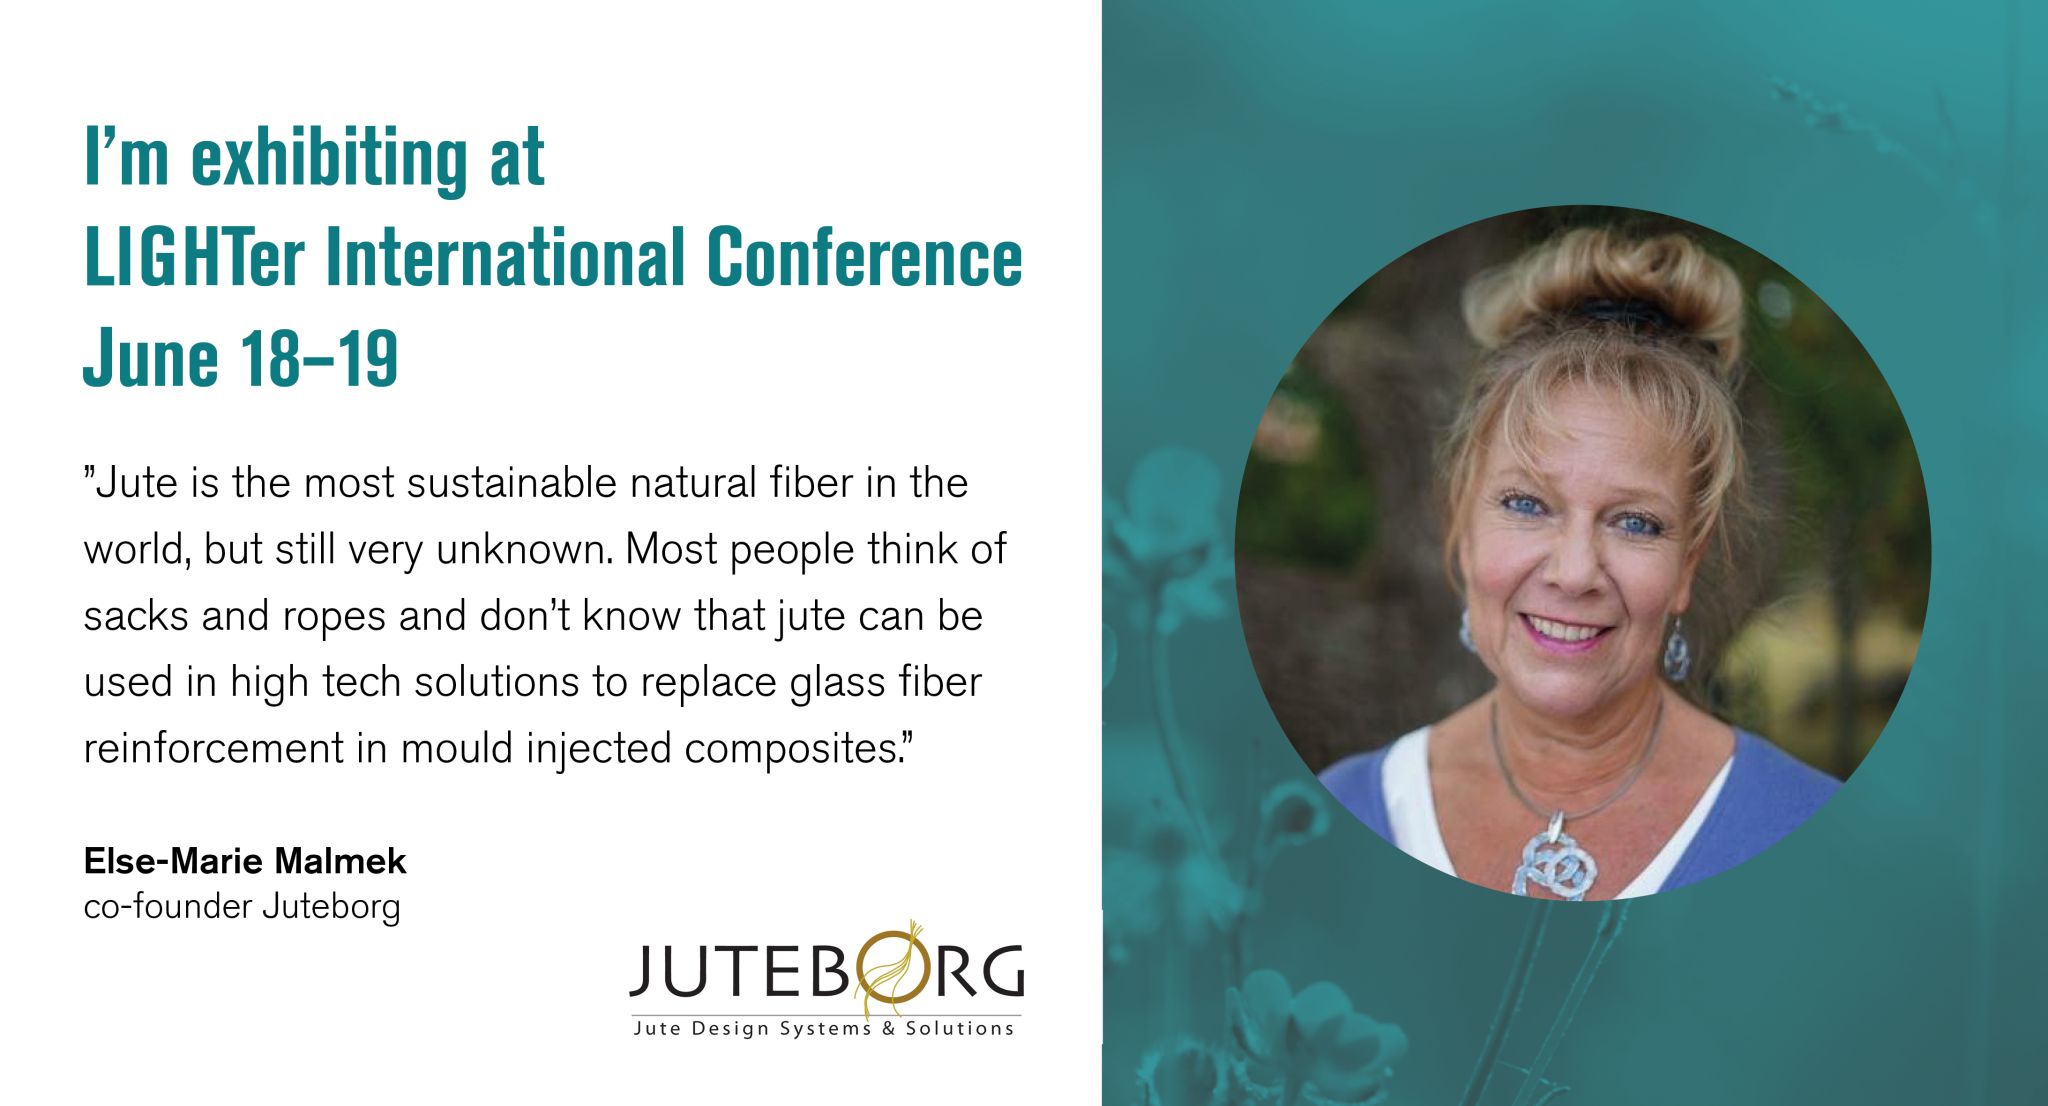 LIGHTer - a strategic innovation programmeLIGHTer - a strategic innovation programme 1,114 followers1,114 followers 1w • 1 week ago 🌟Hello Else-Marie Malmek, we're excited to have you representing Juteborg Sweden AB as an exhibitor at LIGHTer International Conference on June 18-19! 🌟 What goals and expectations motivated you to join us as an exhibitor? - Juteborg’s goal is to “juteify” the participants at the conference! We would like to share knowledge of the natural fiber of jute, “The Golden Fiber”, and showcase high-tech jute composites, JuTech™, from our research projects, partly financed by the LIGHTer program. Jute is the most sustainable natural fiber in the world but remains largely unknown. Most people think of sacks and ropes and are unaware that jute can be used in high-tech solutions, for example, in the automotive industry, replacing glass fiber reinforcement in mold-injected composites. Considering the conference theme “Towards net-zero industry through lightweight innovation,” how does Juteborg contribute to this goal? - Jute is a lightweight material, and since it can replace glass fiber as reinforcement in many applications, the end product will be lighter. How much lighter depends on the material it replaces. Jute is also biodegradable, compostable, and the process from farmer to factory consumes a minimal amount of energy. Additionally, jute is a fast-growing crop, maturing in only 120 days and binds a significant amount of CO2 annually. What relationships do you hope to establish during the conference? - Juteborg seeks to be a development partner and wishes to cooperate with our end customers in the early design phases, as it is during these phases that the most crucial decisions are made regarding the sustainability of the end product. We are eager to explore more application areas for jute and, therefore, aim to develop more proof of concepts in close cooperation with companies primarily within the automotive, construction, interior, textile, and packaging sectors.